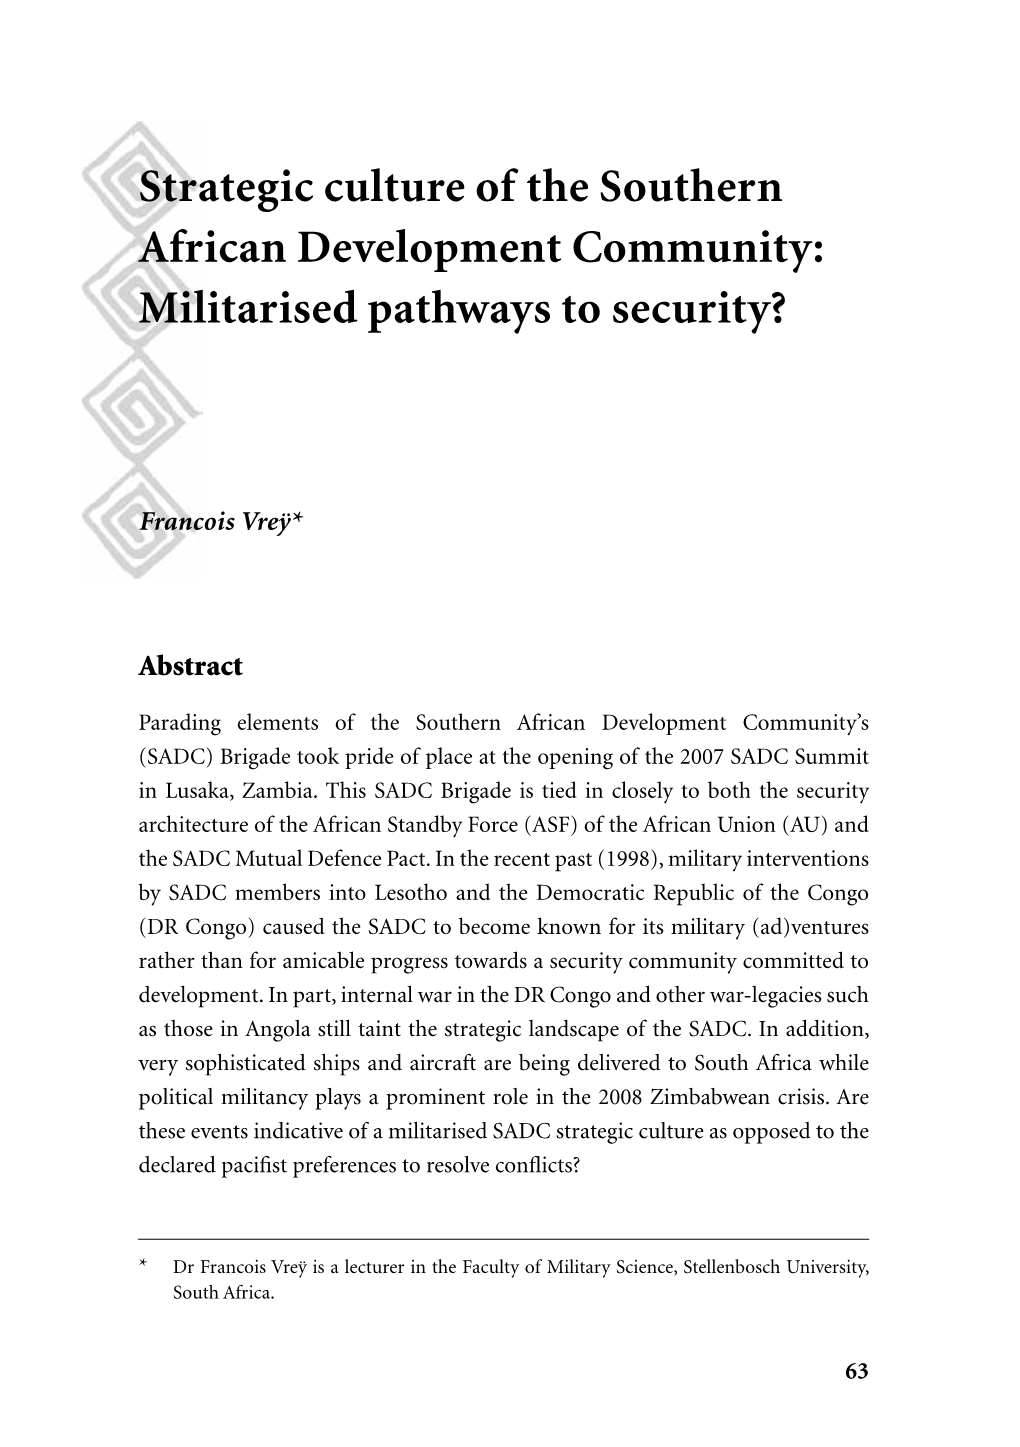 Strategic Culture of the Southern African Development Community: Militarised Pathways to Security?